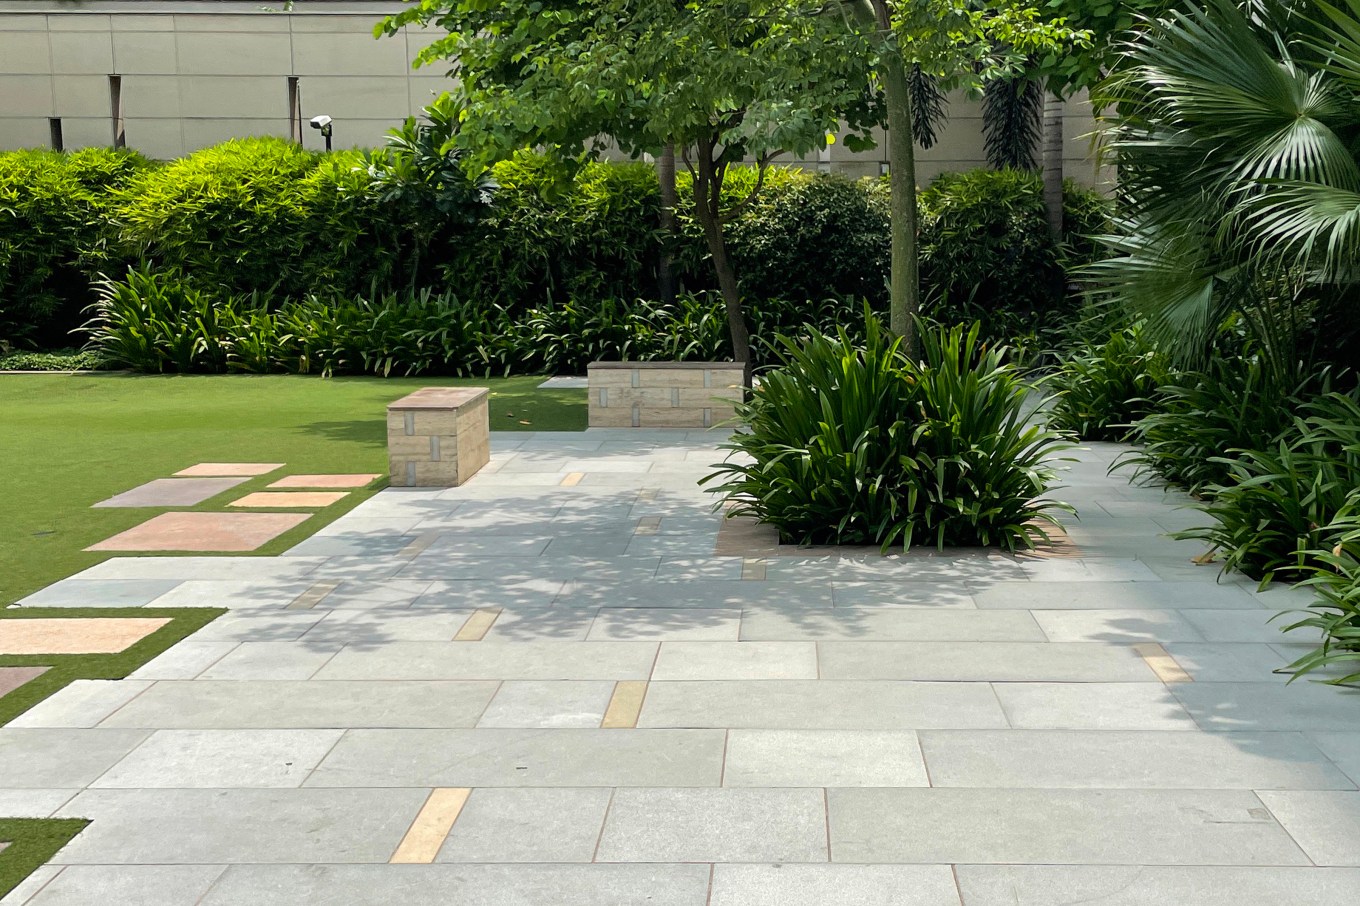 Patio with concrete pavers in varying shapes and sizes with well kept hedges and trees.